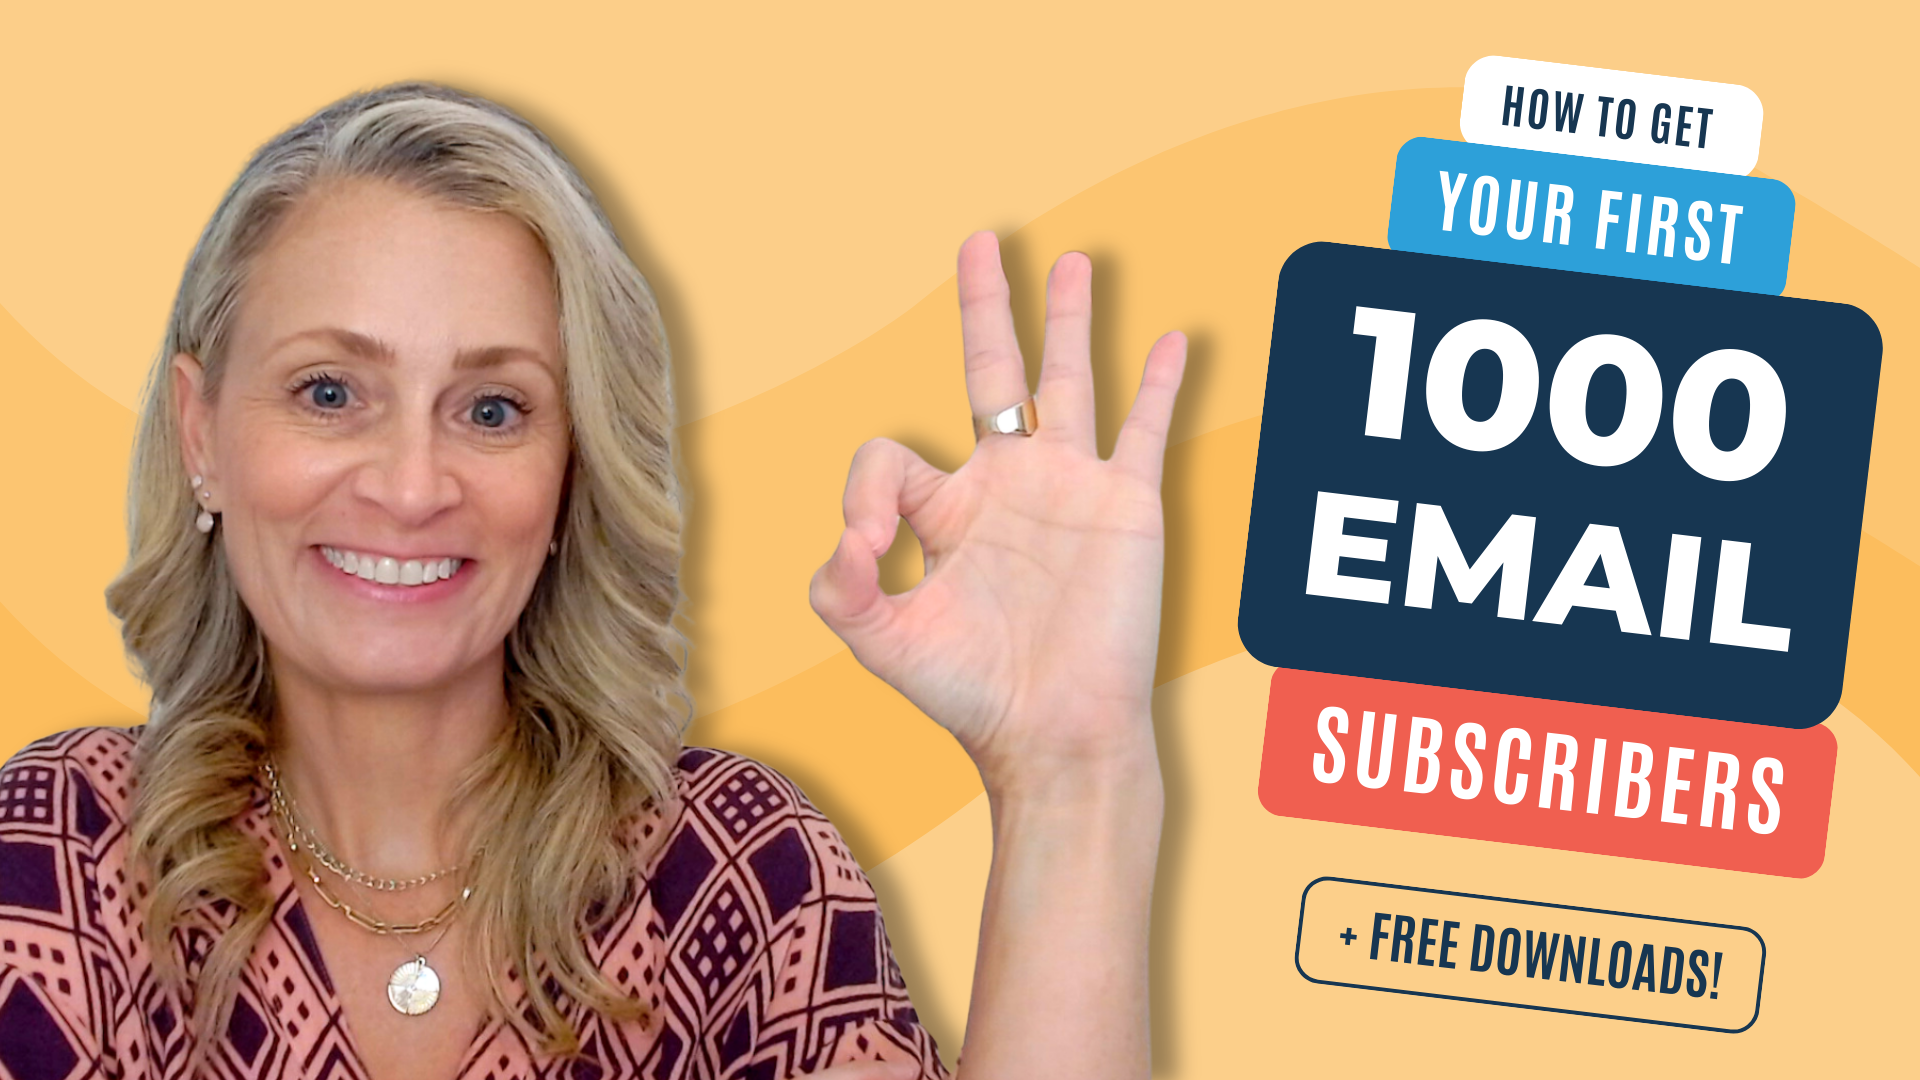 How to Get Your First 1,000 Email Subscribers